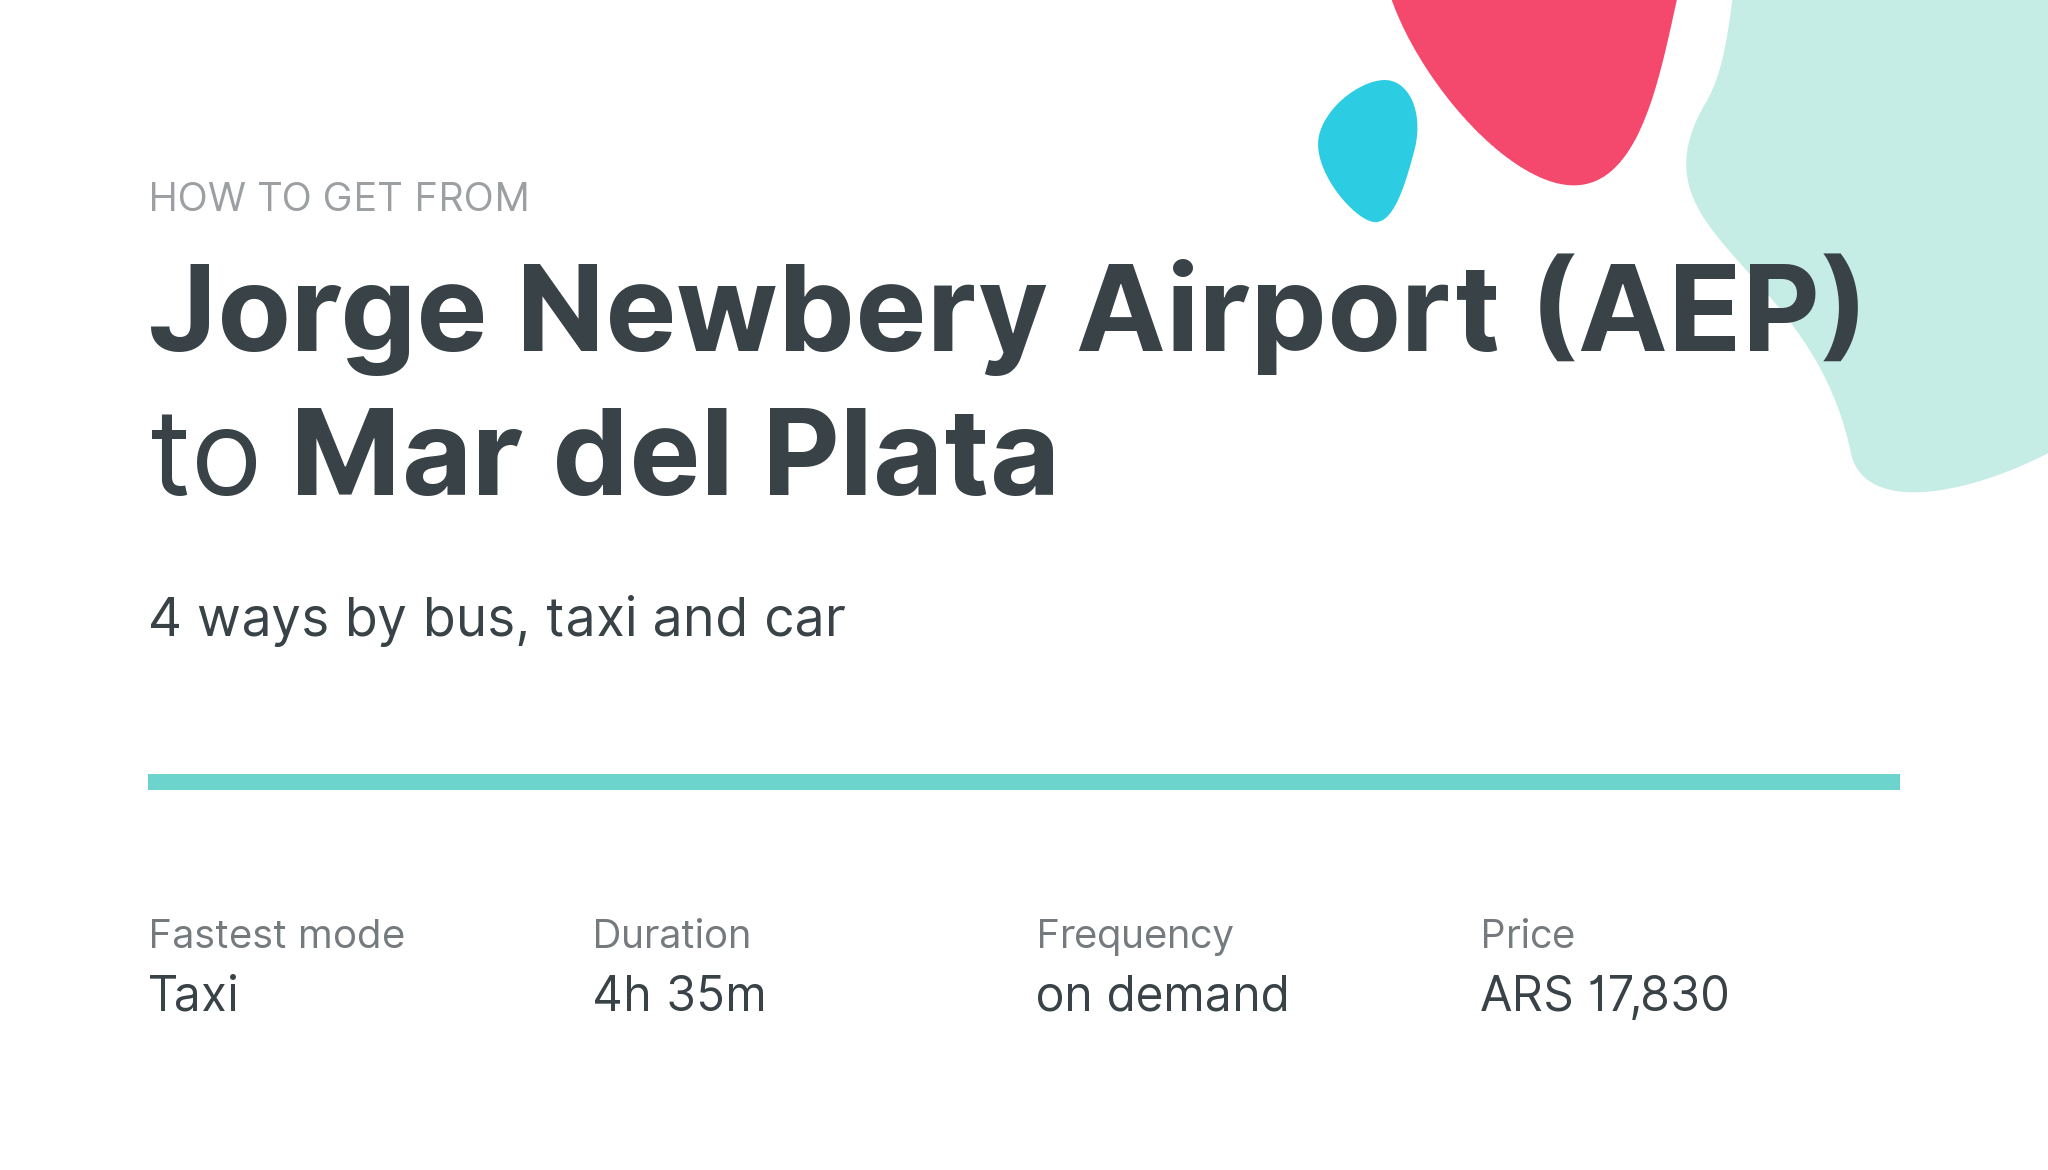 How do I get from Jorge Newbery Airport (AEP) to Mar del Plata